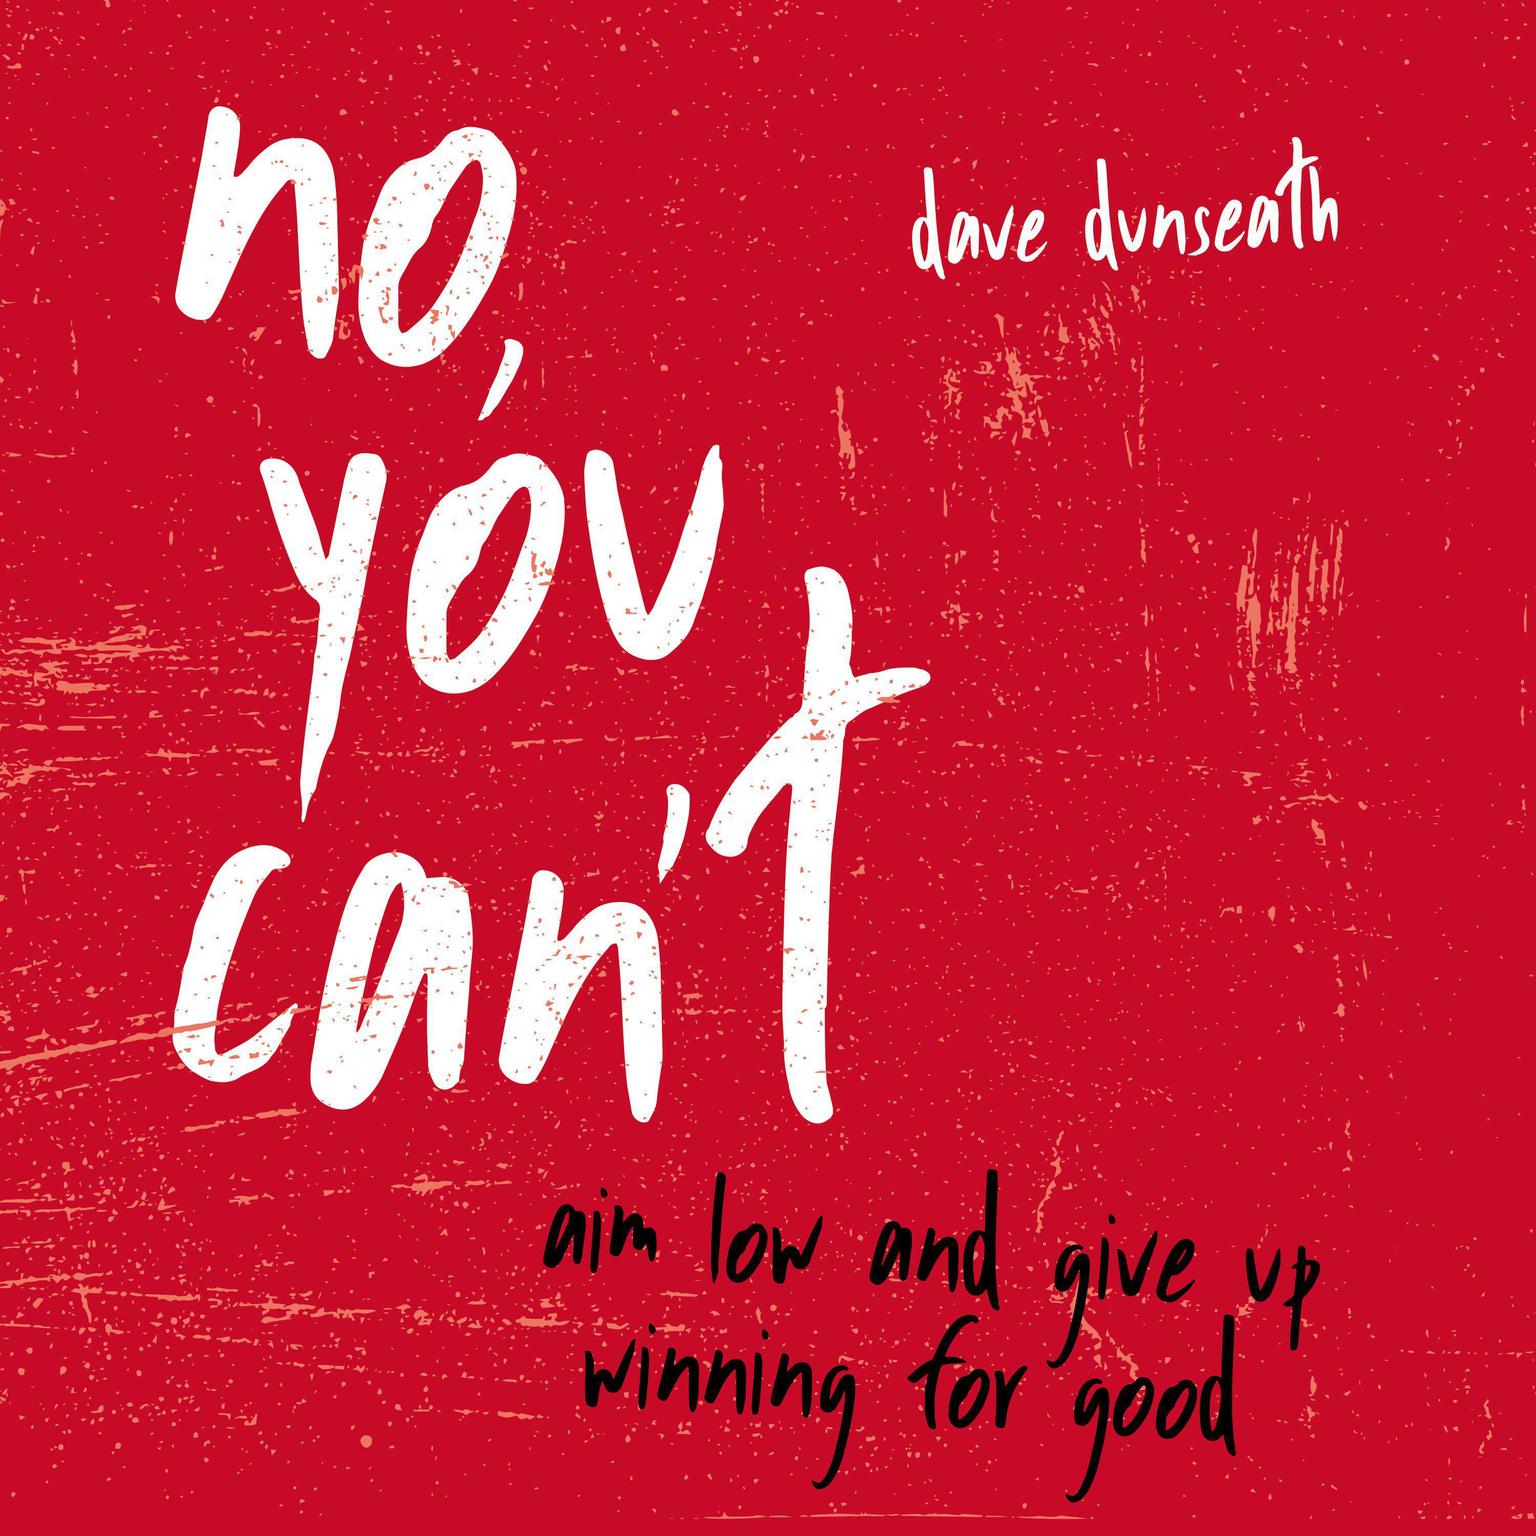 No, You Cant: Aim Low and Give Up Winning for Good Audiobook, by Dave Dunseath